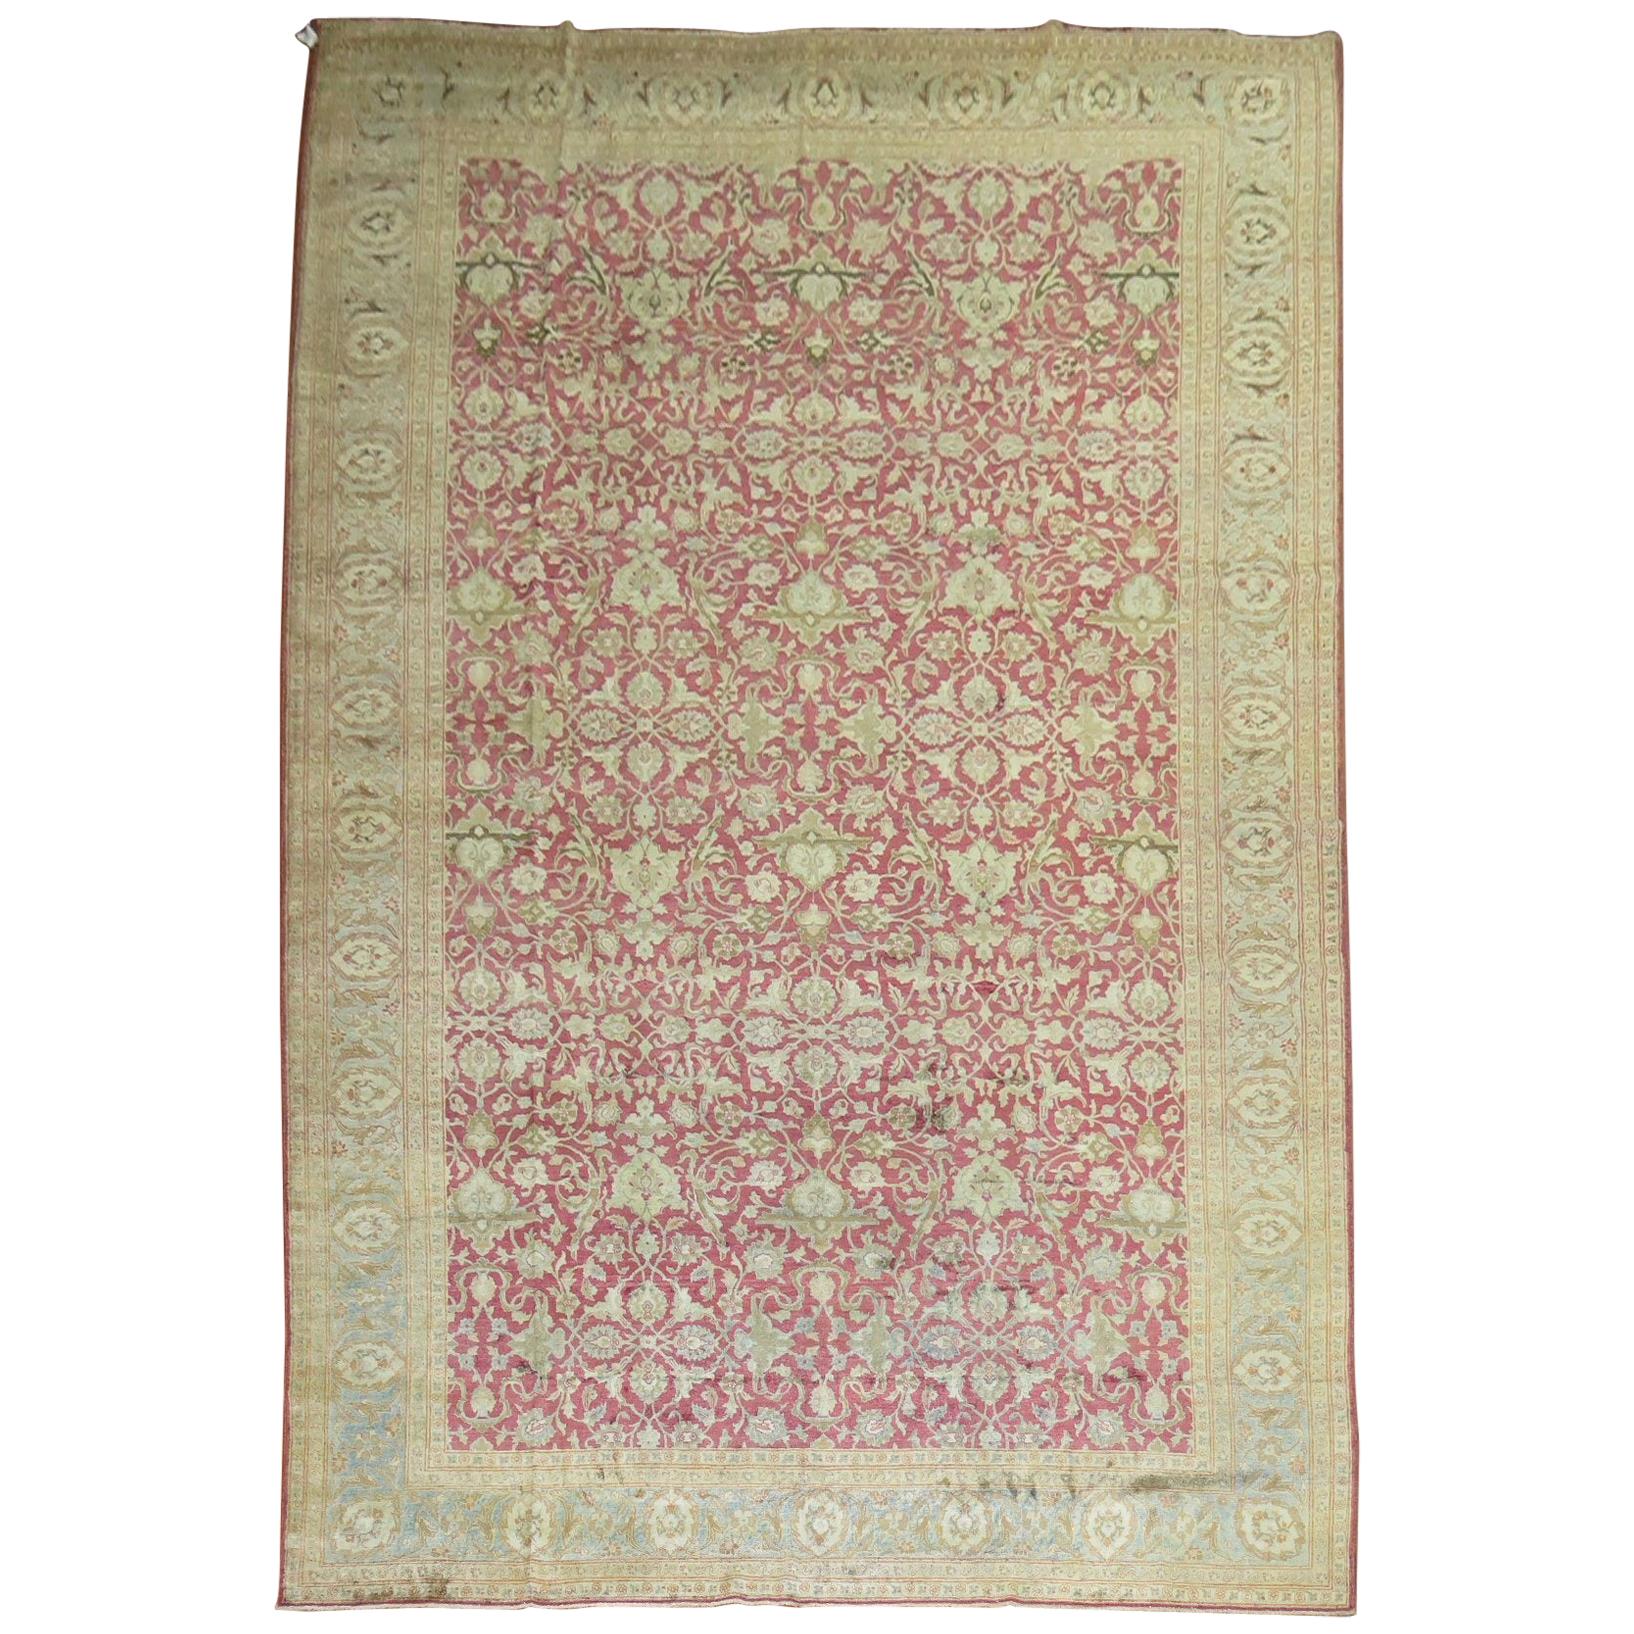 Raspberry Icy Blue Oversize Persian Tabriz Rug, Early 20th Century